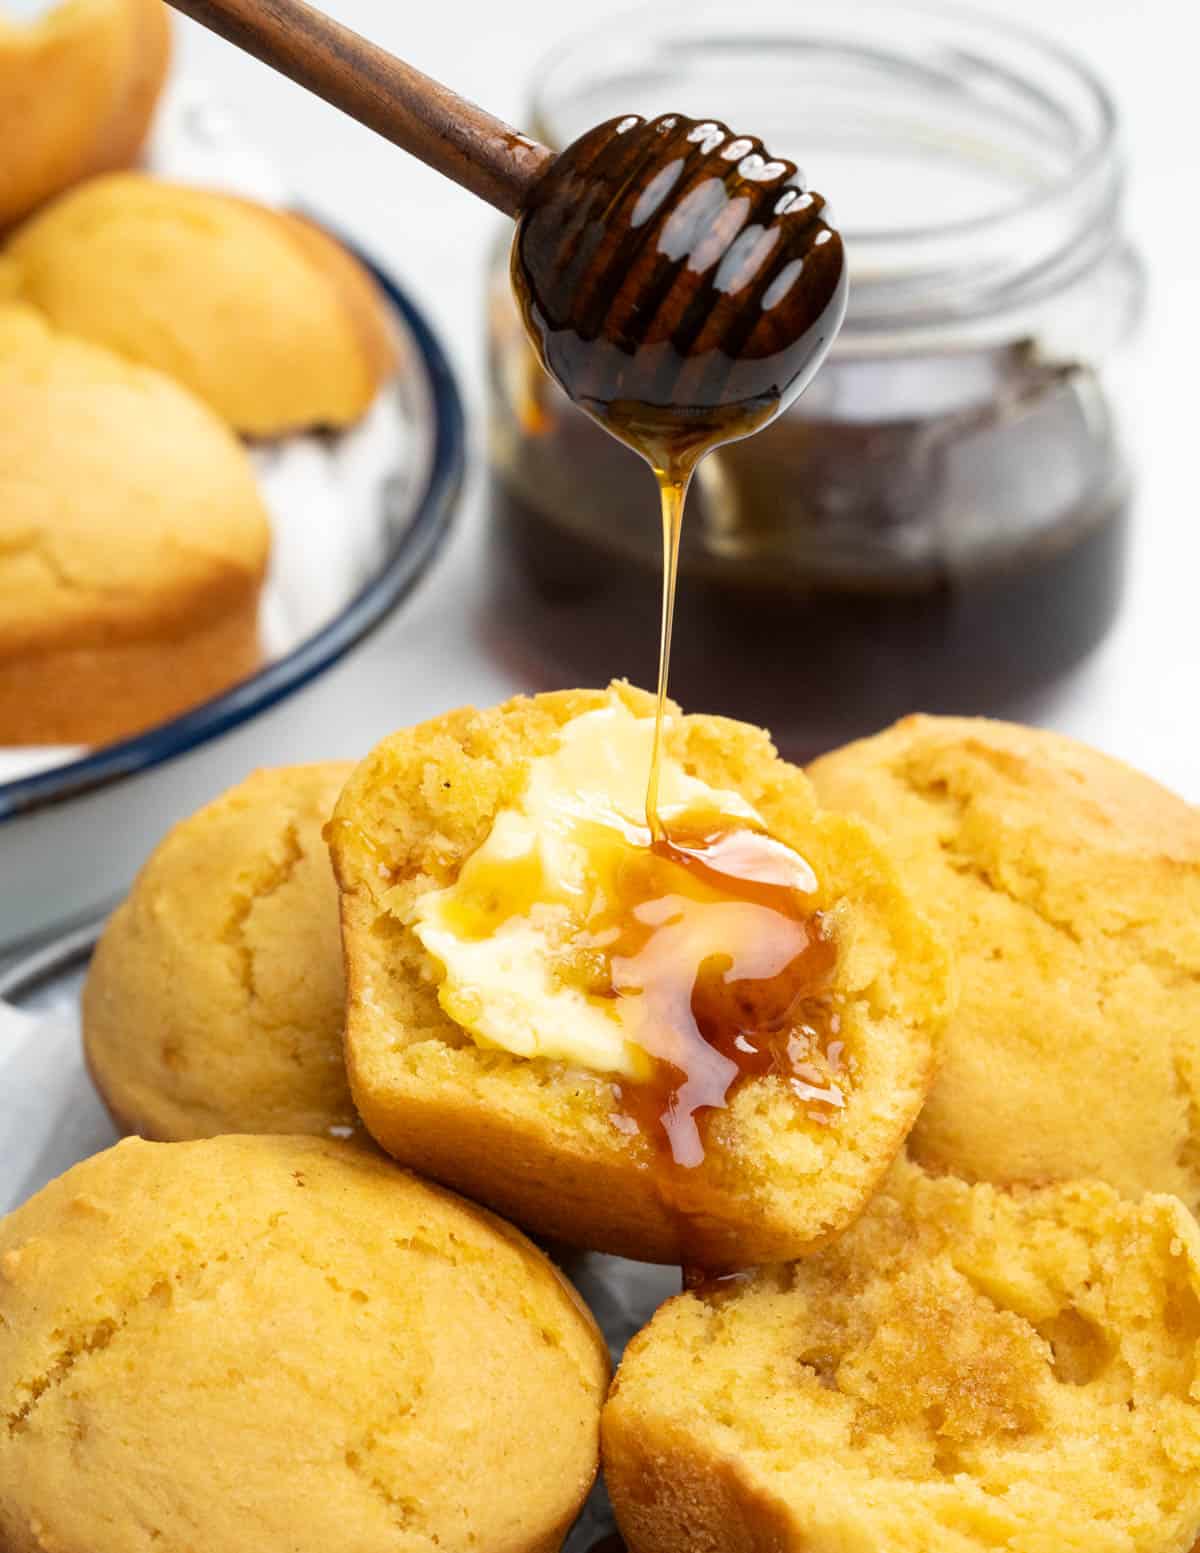 These Cornbread muffins are delicious with moist tender crumbs. These are savory with just a little hint of sugar. Served with butter and drizzle of honey